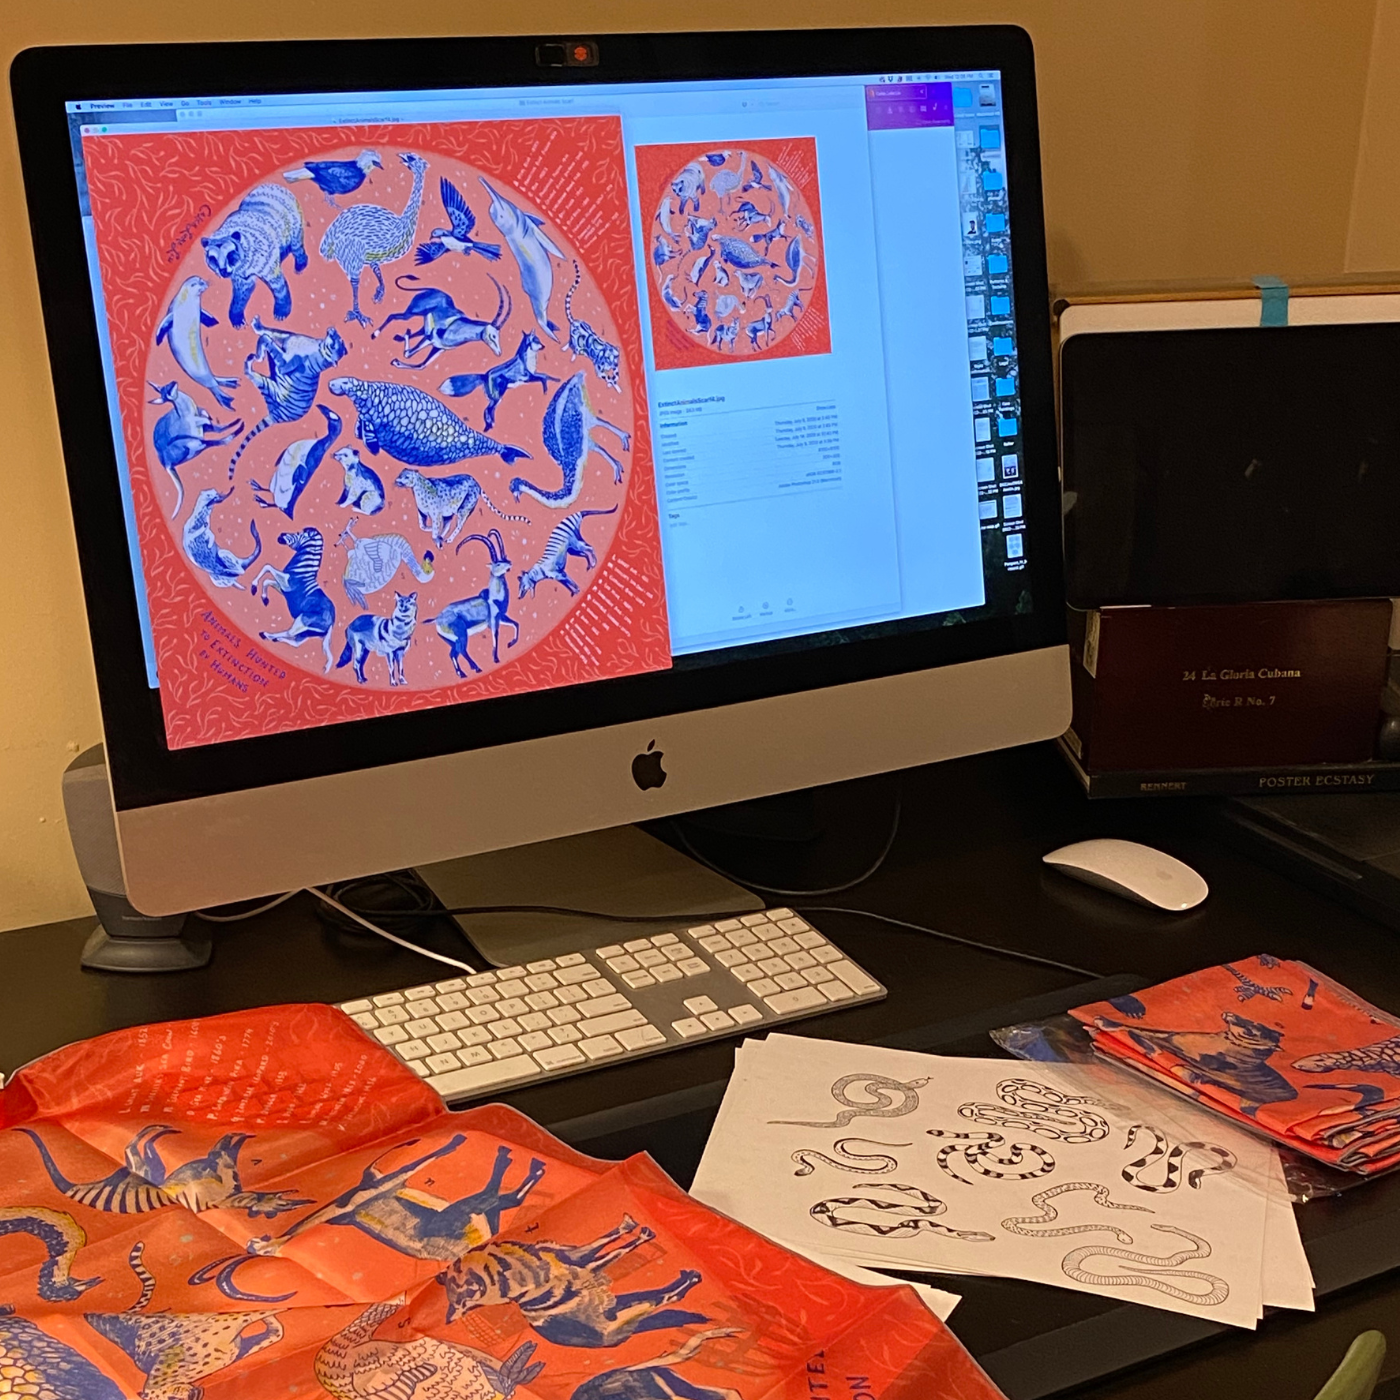 A design by Caleb Luke Lin is up on a computer monitor and also on a displayed scarf to the bottom left of the monitor and a folded scarf to the bottom right. The design has a red background and in a lighter red circle in the center of the design, a range of extinct animals, from birds to beasts to aquatic creatures. A drawing of different snakes is on a piece of paper in black ink by the computer’s keyboard.